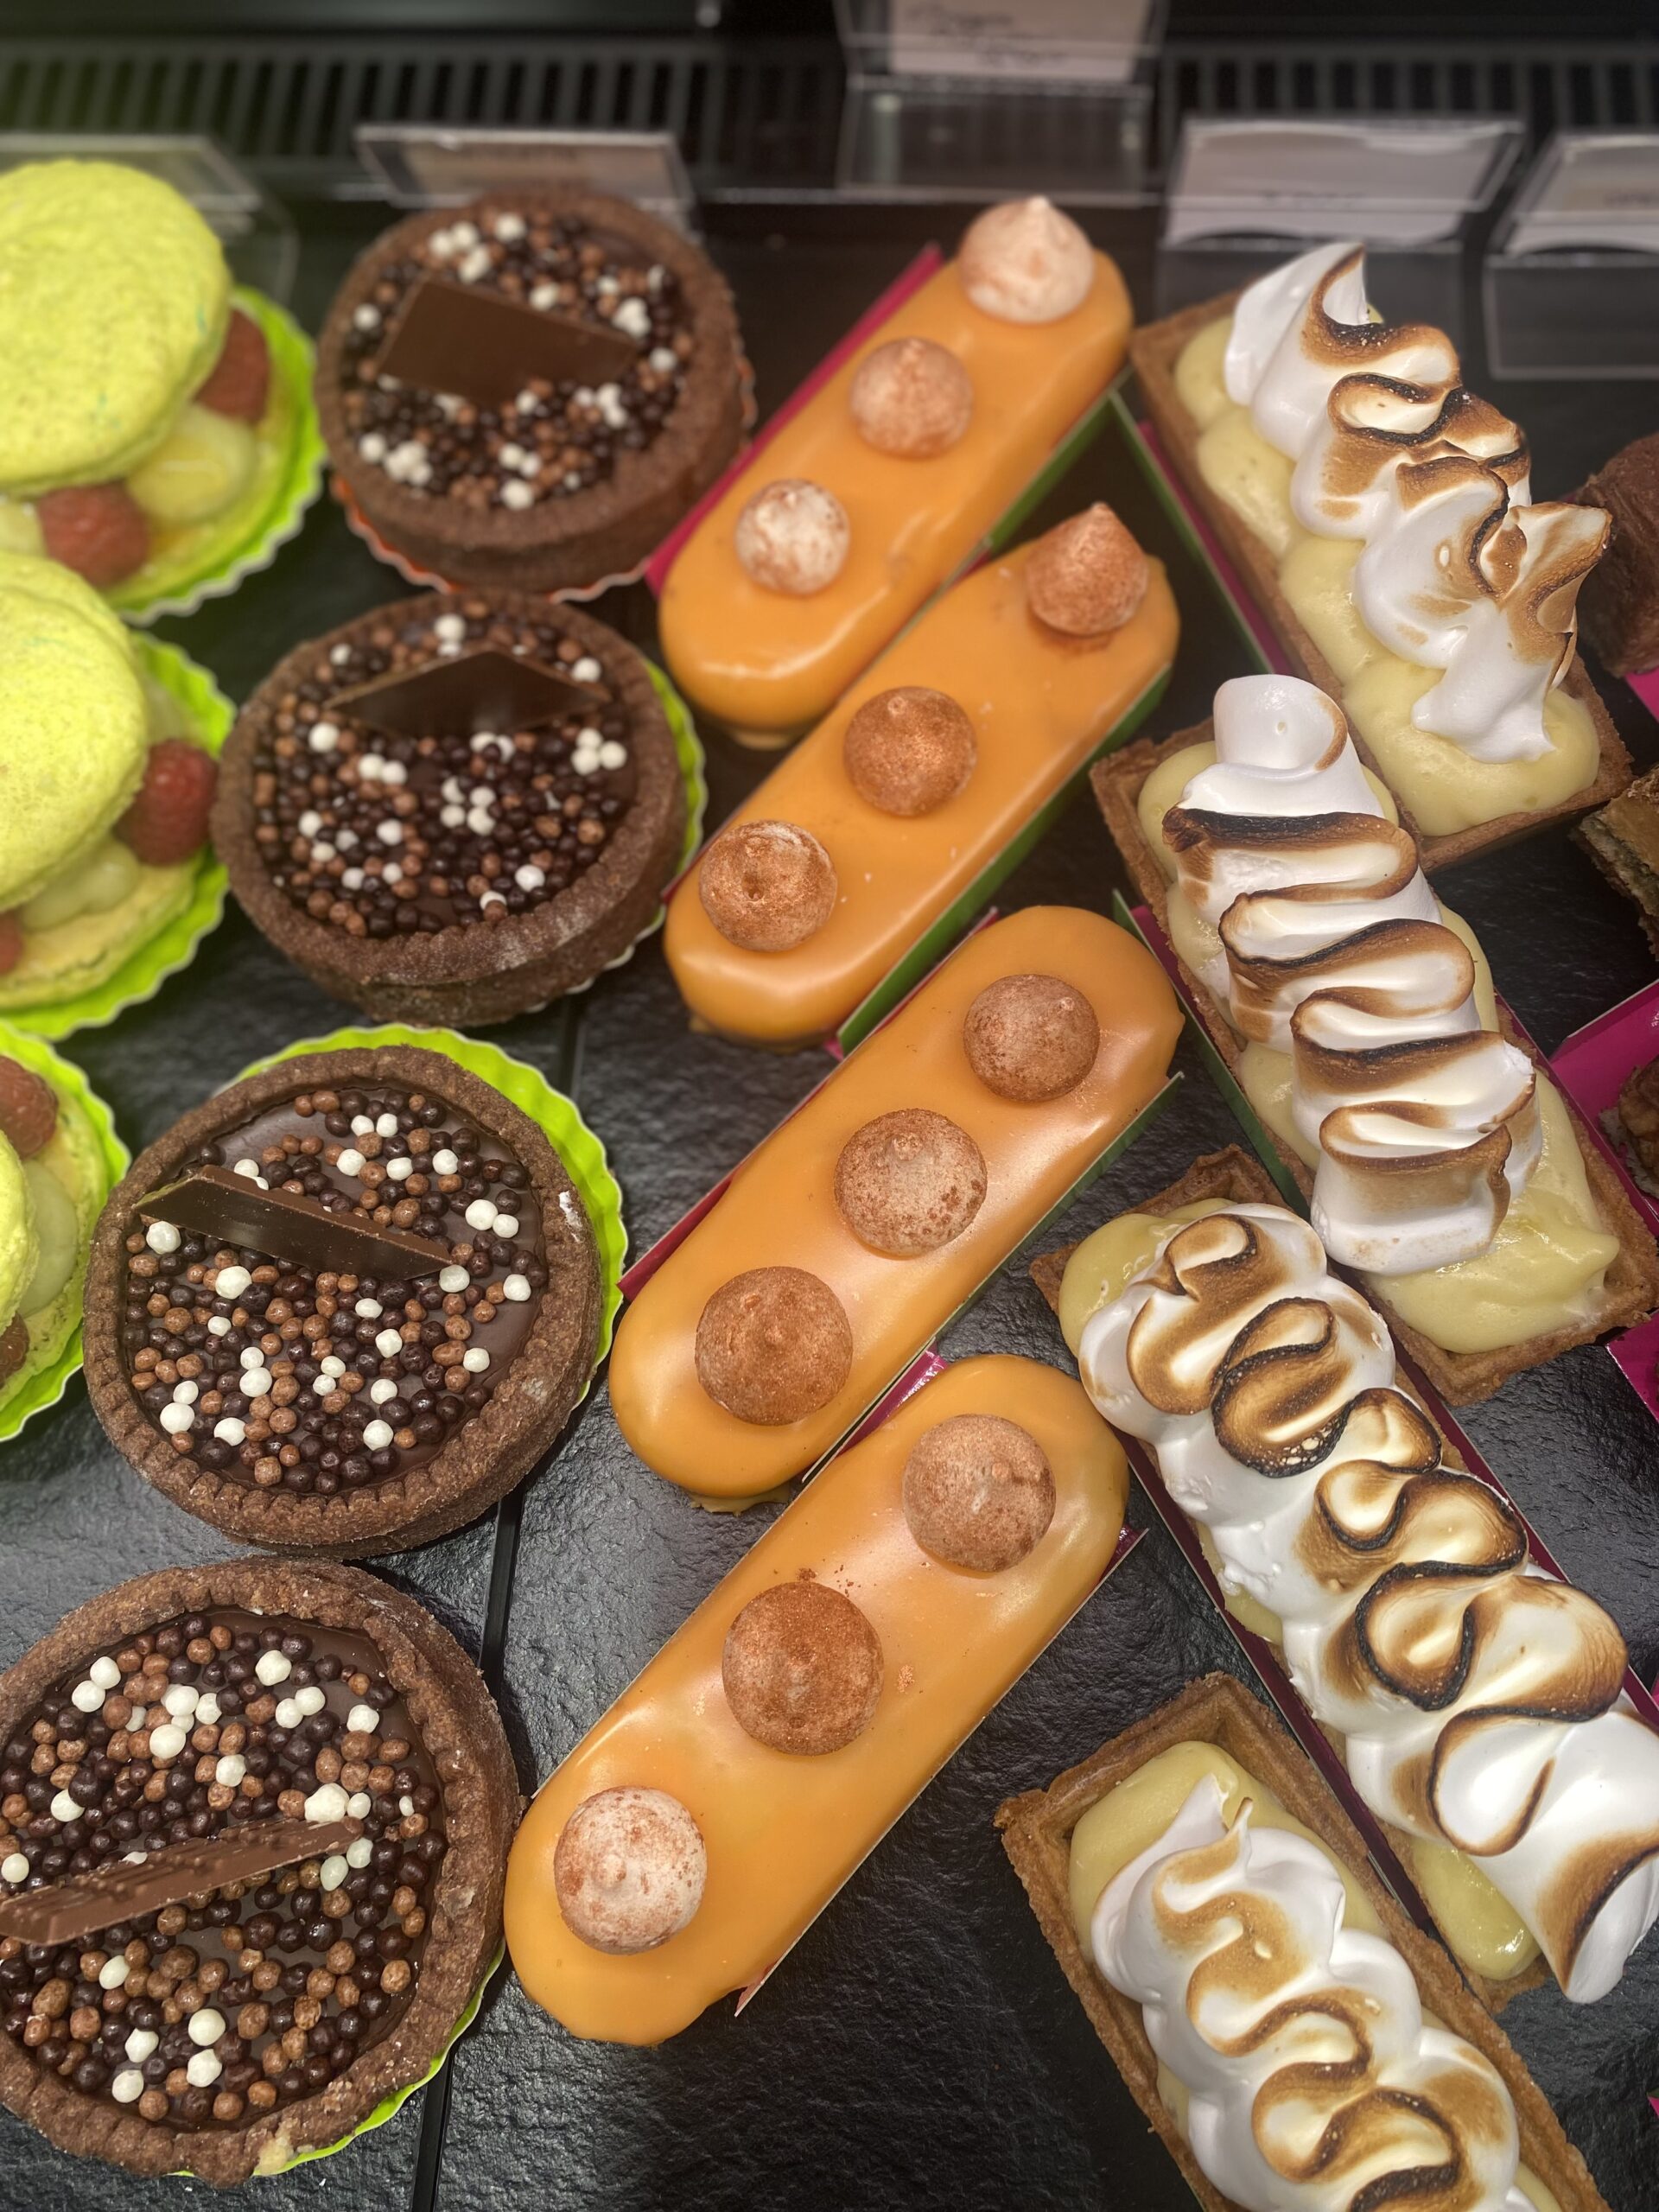 patisserie rue nationale tours